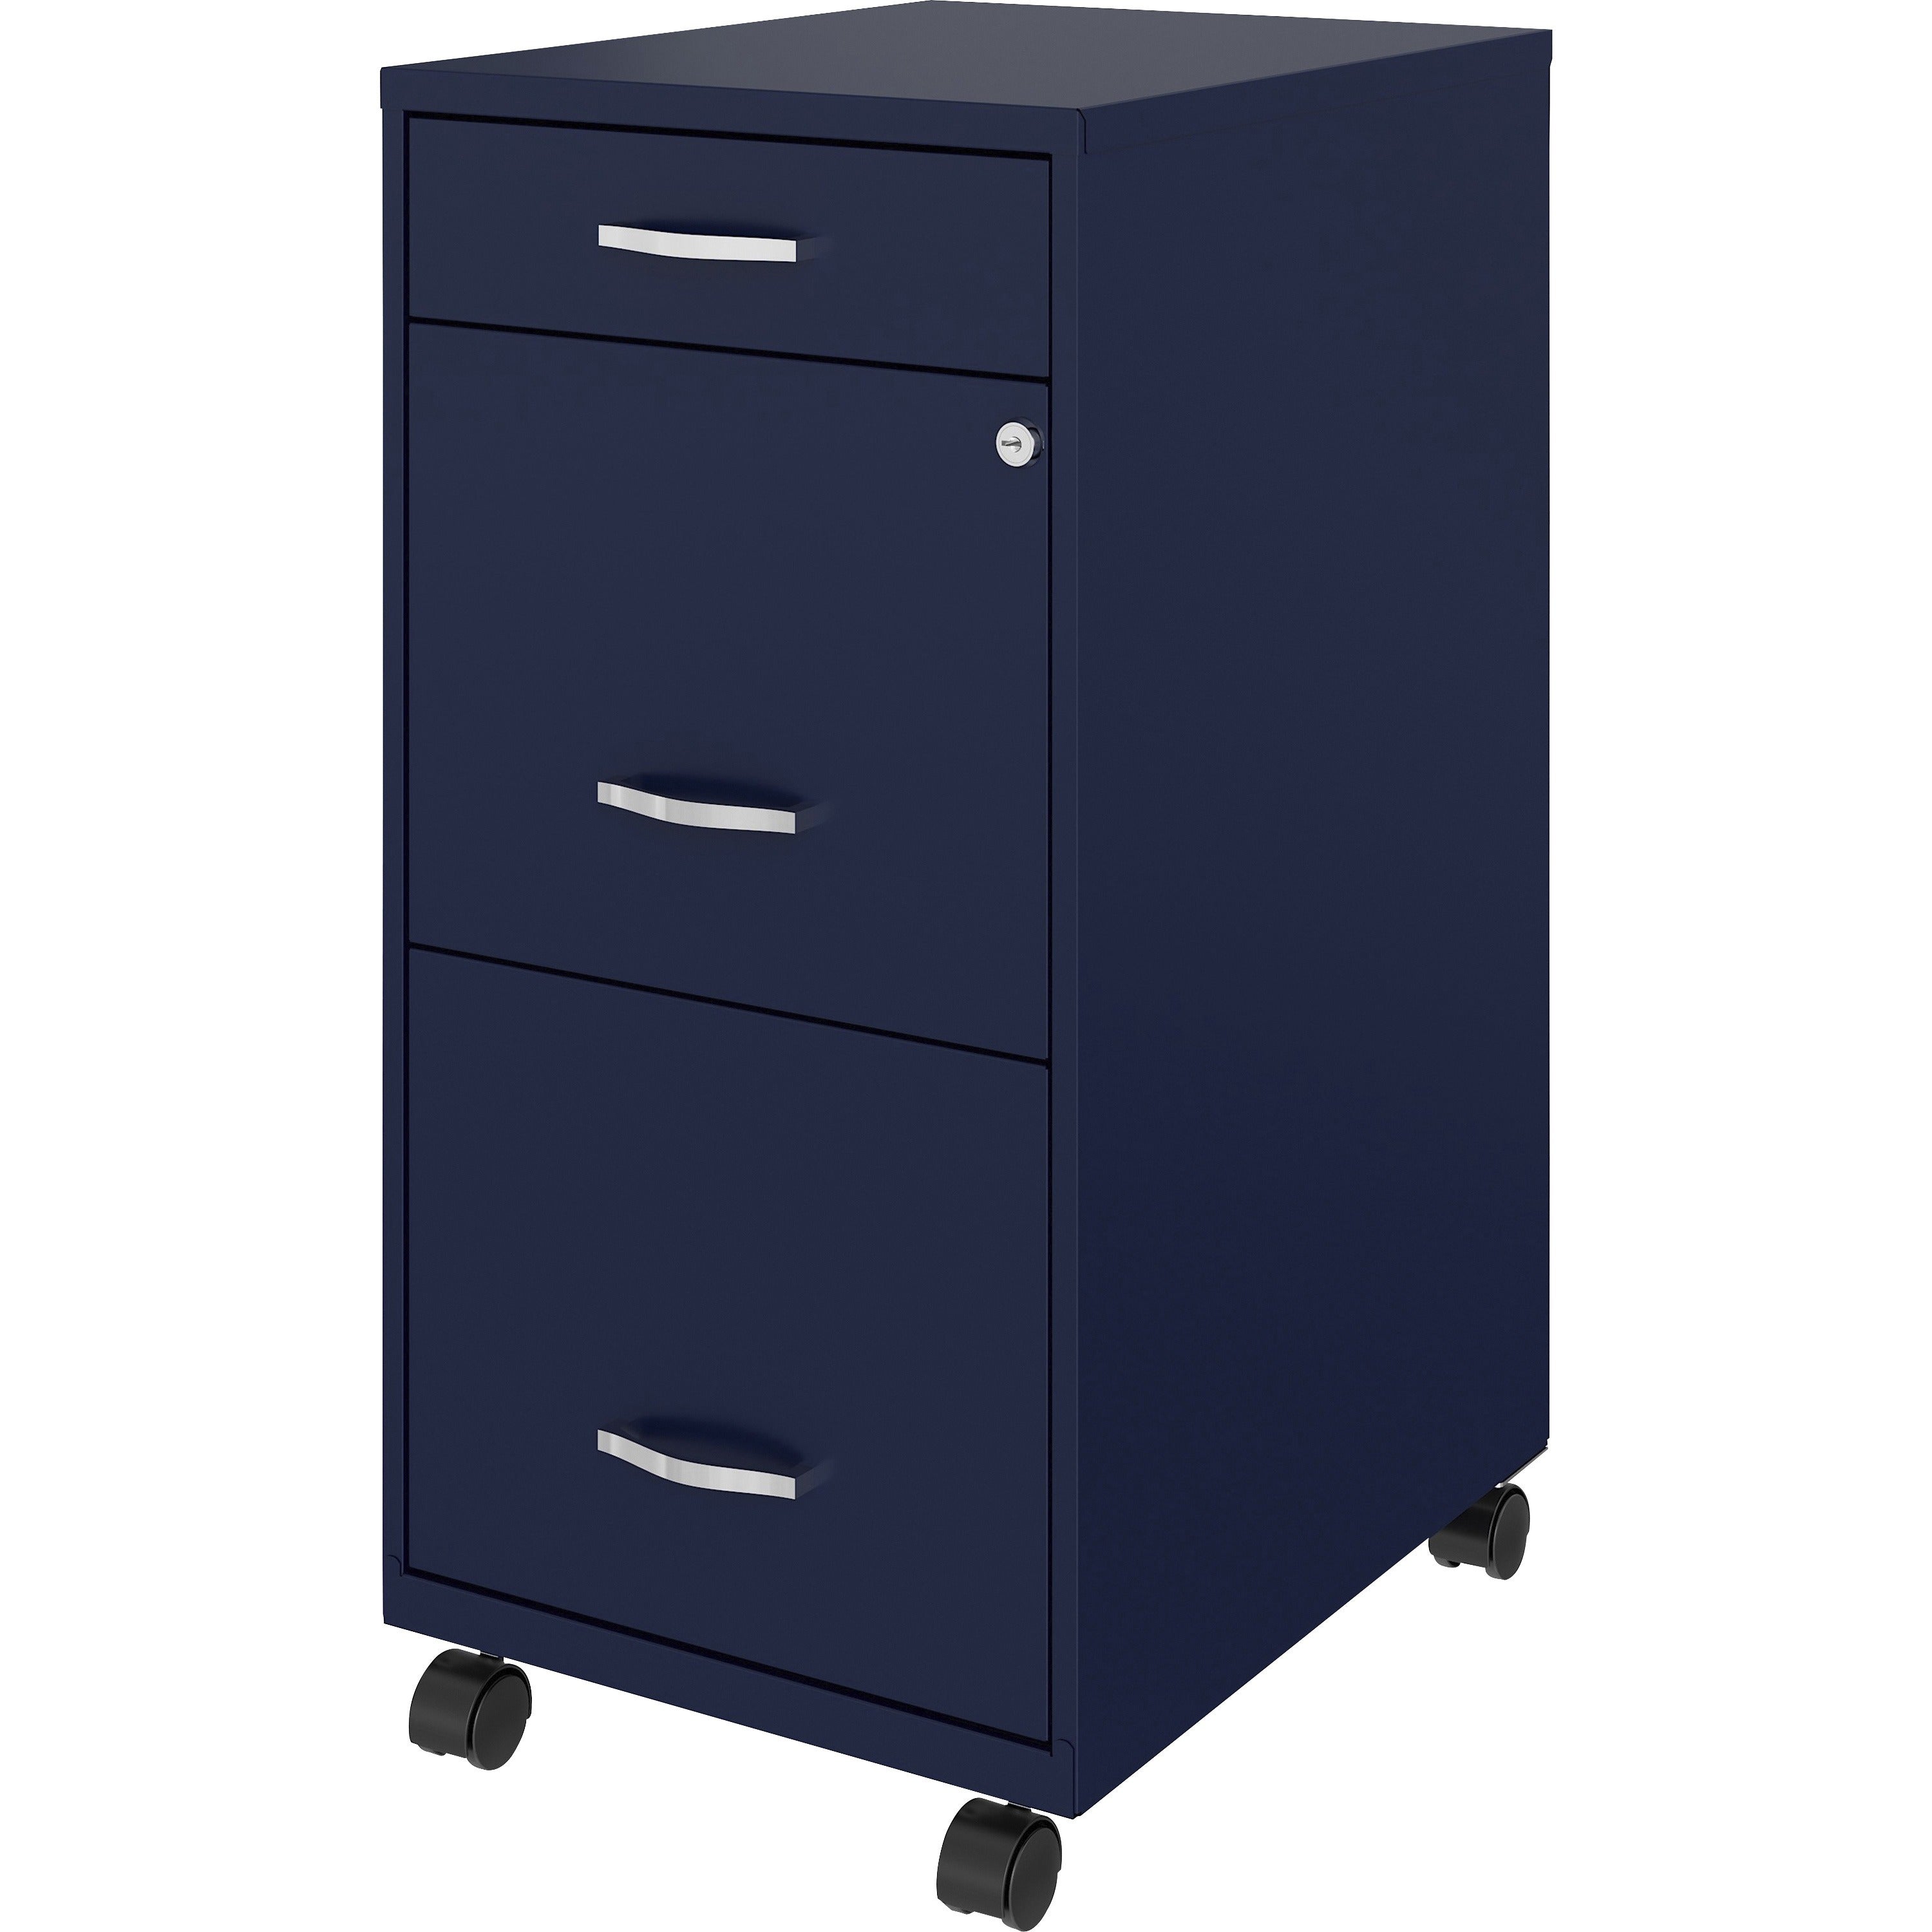 nusparc-mobile-file-cabinet-142-x-18-x-295-3-x-drawers-for-file-box-letter-mobility-locking-drawer-glide-suspension-3-4-drawer-extension-cam-lock-nonporous-surface-blue-painted-steel-recycled_nprvf318bmny - 3